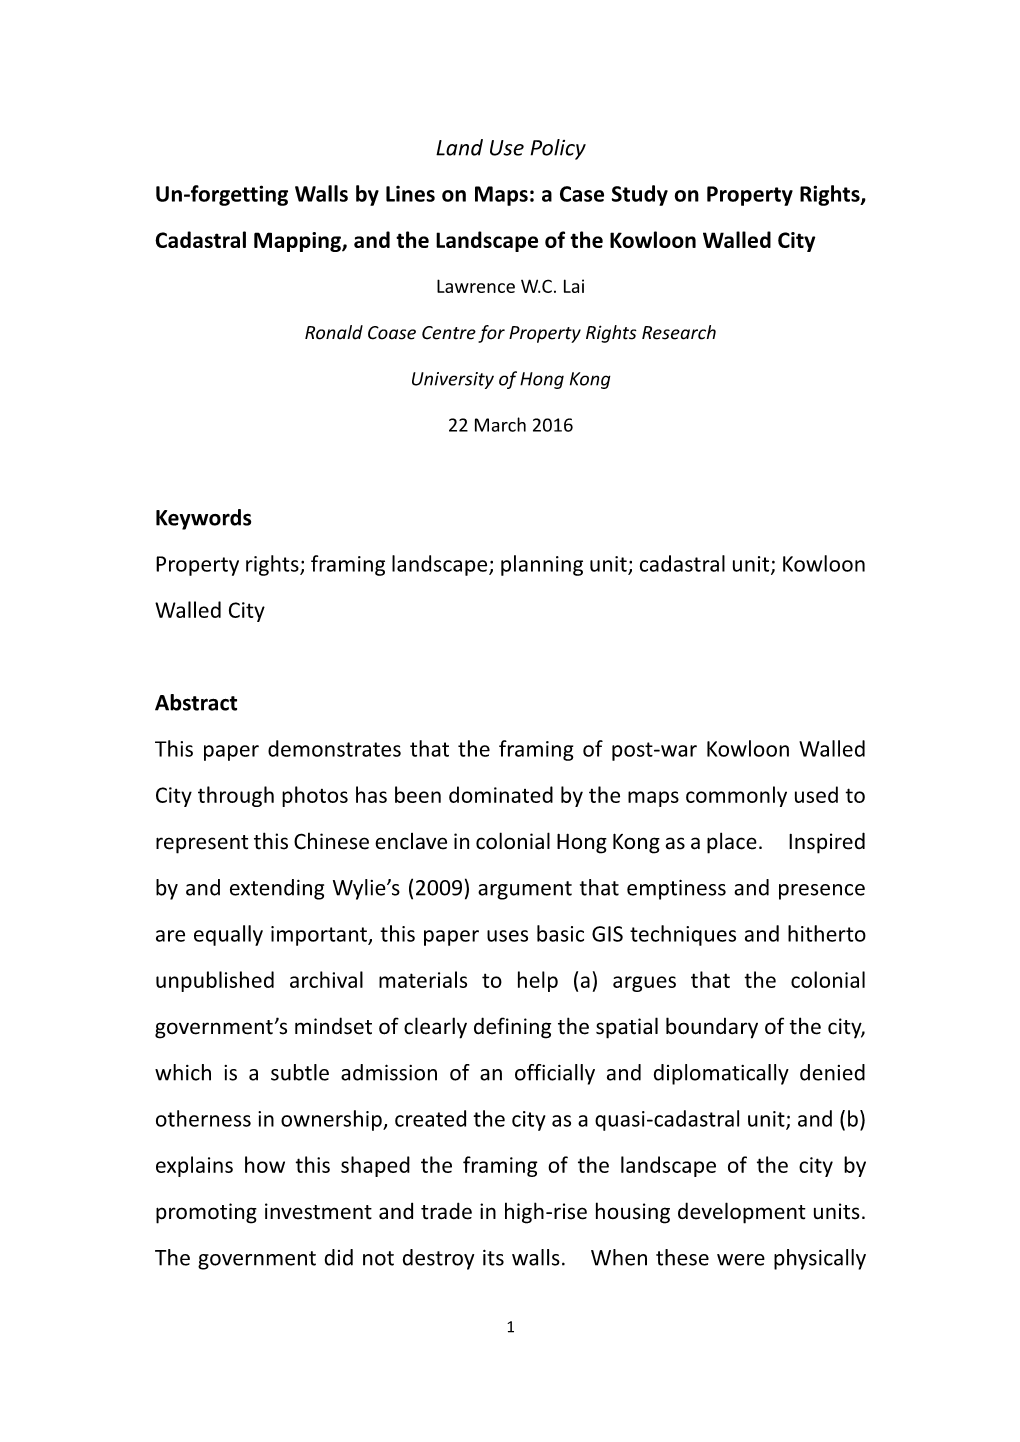 Land Use Policy Un-Forgetting Walls by Lines on Maps: a Case Study on Property Rights, Cadastral Mapping, and the Landscape of the Kowloon Walled City